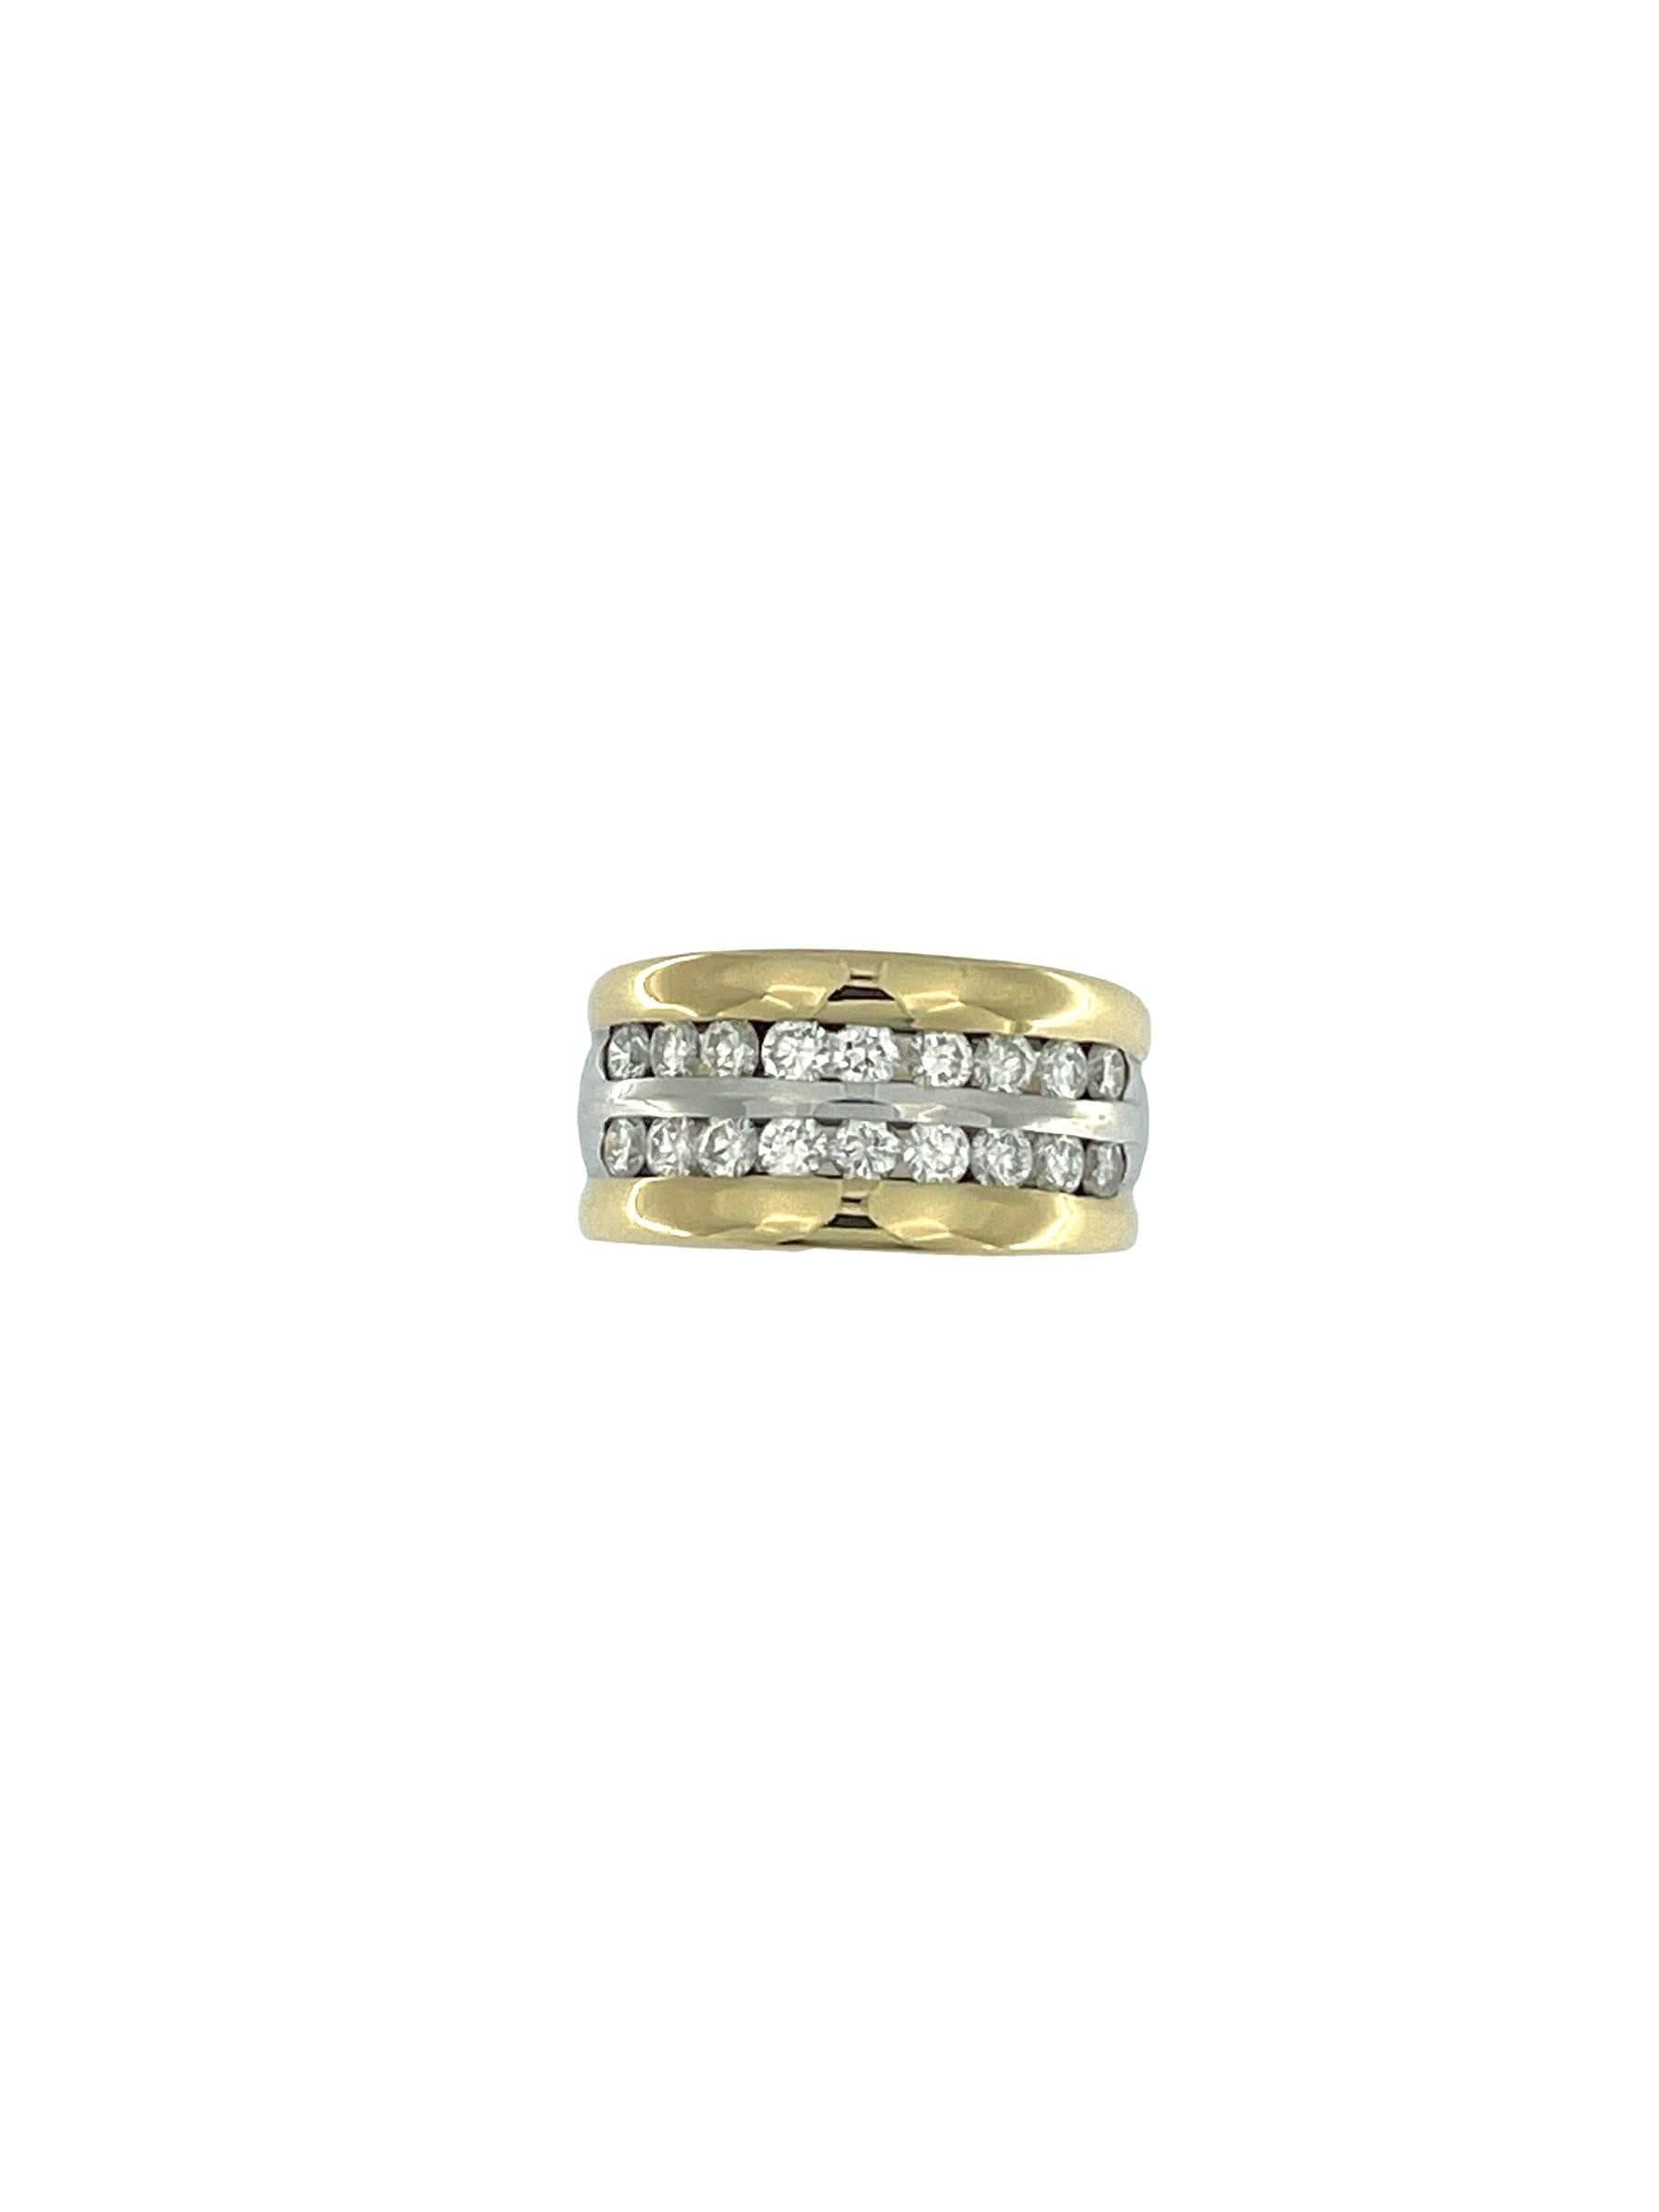 HRD Certified Diamonds Yellow and White Gold Band Ring In Good Condition For Sale In Esch sur Alzette, Esch-sur-Alzette